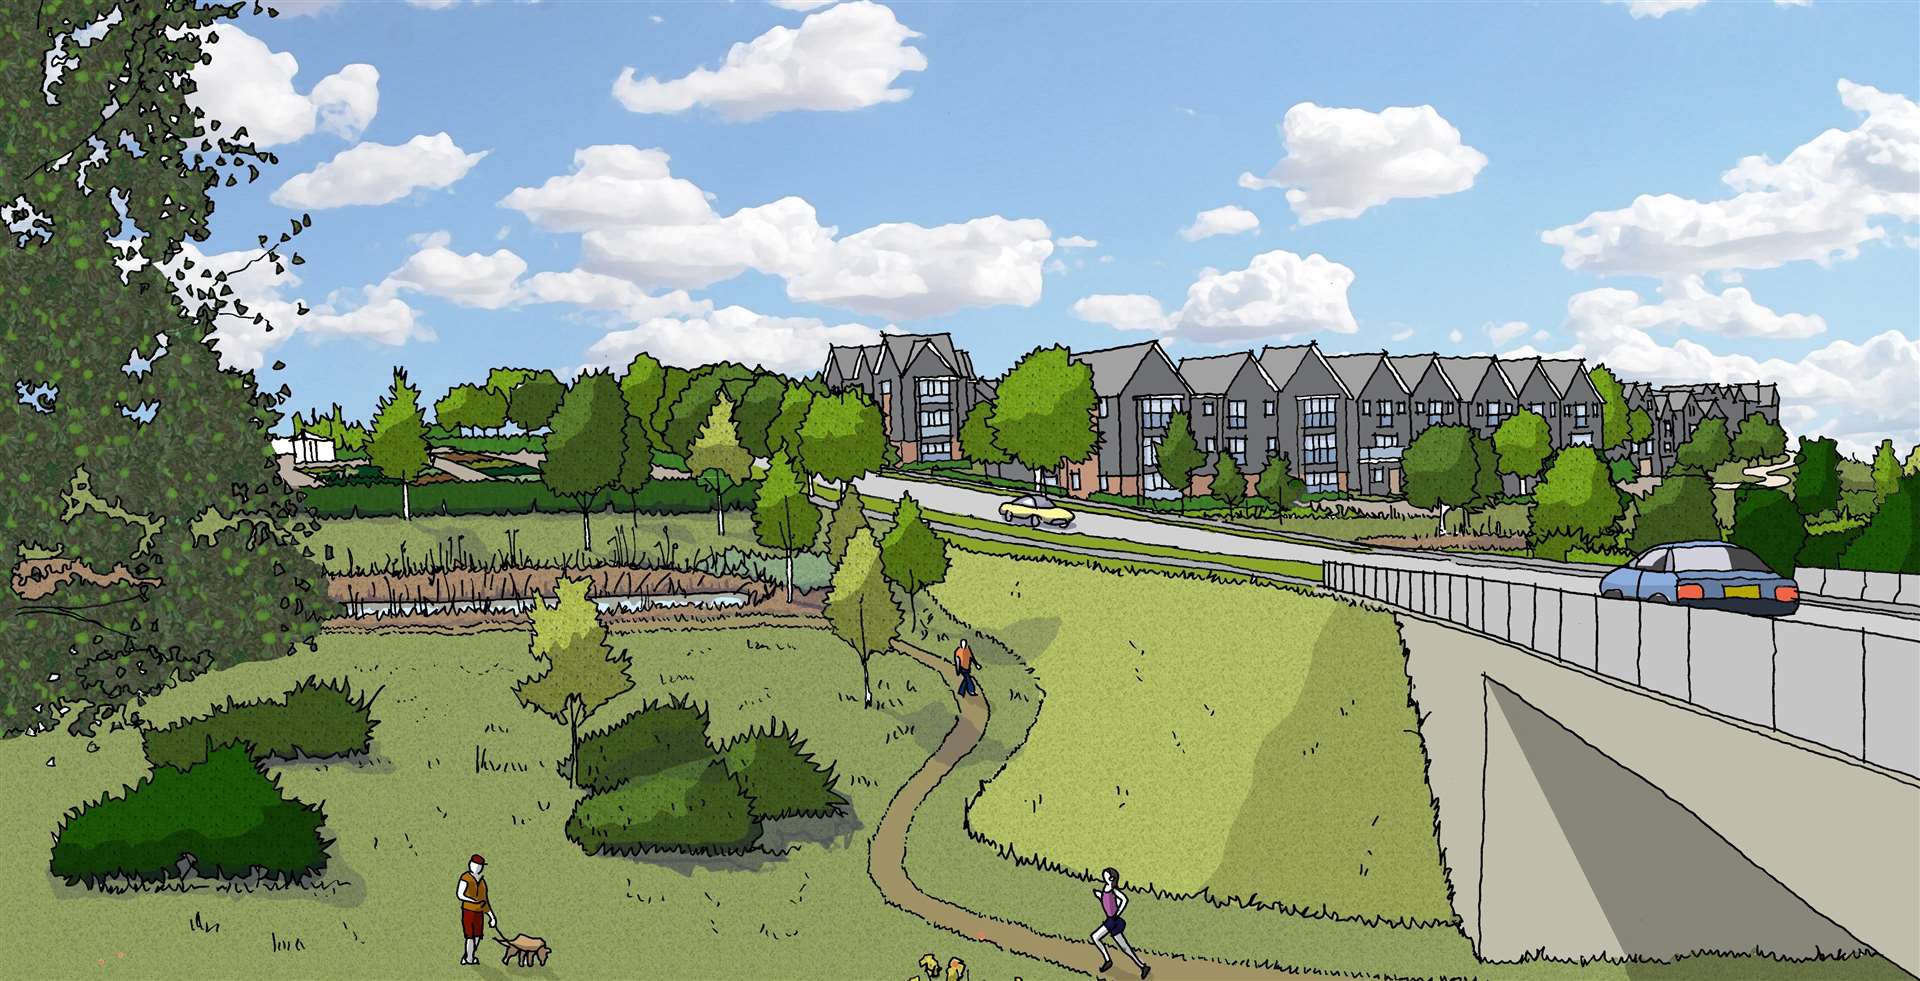 In total, 799 homes will be built at Springhead Park